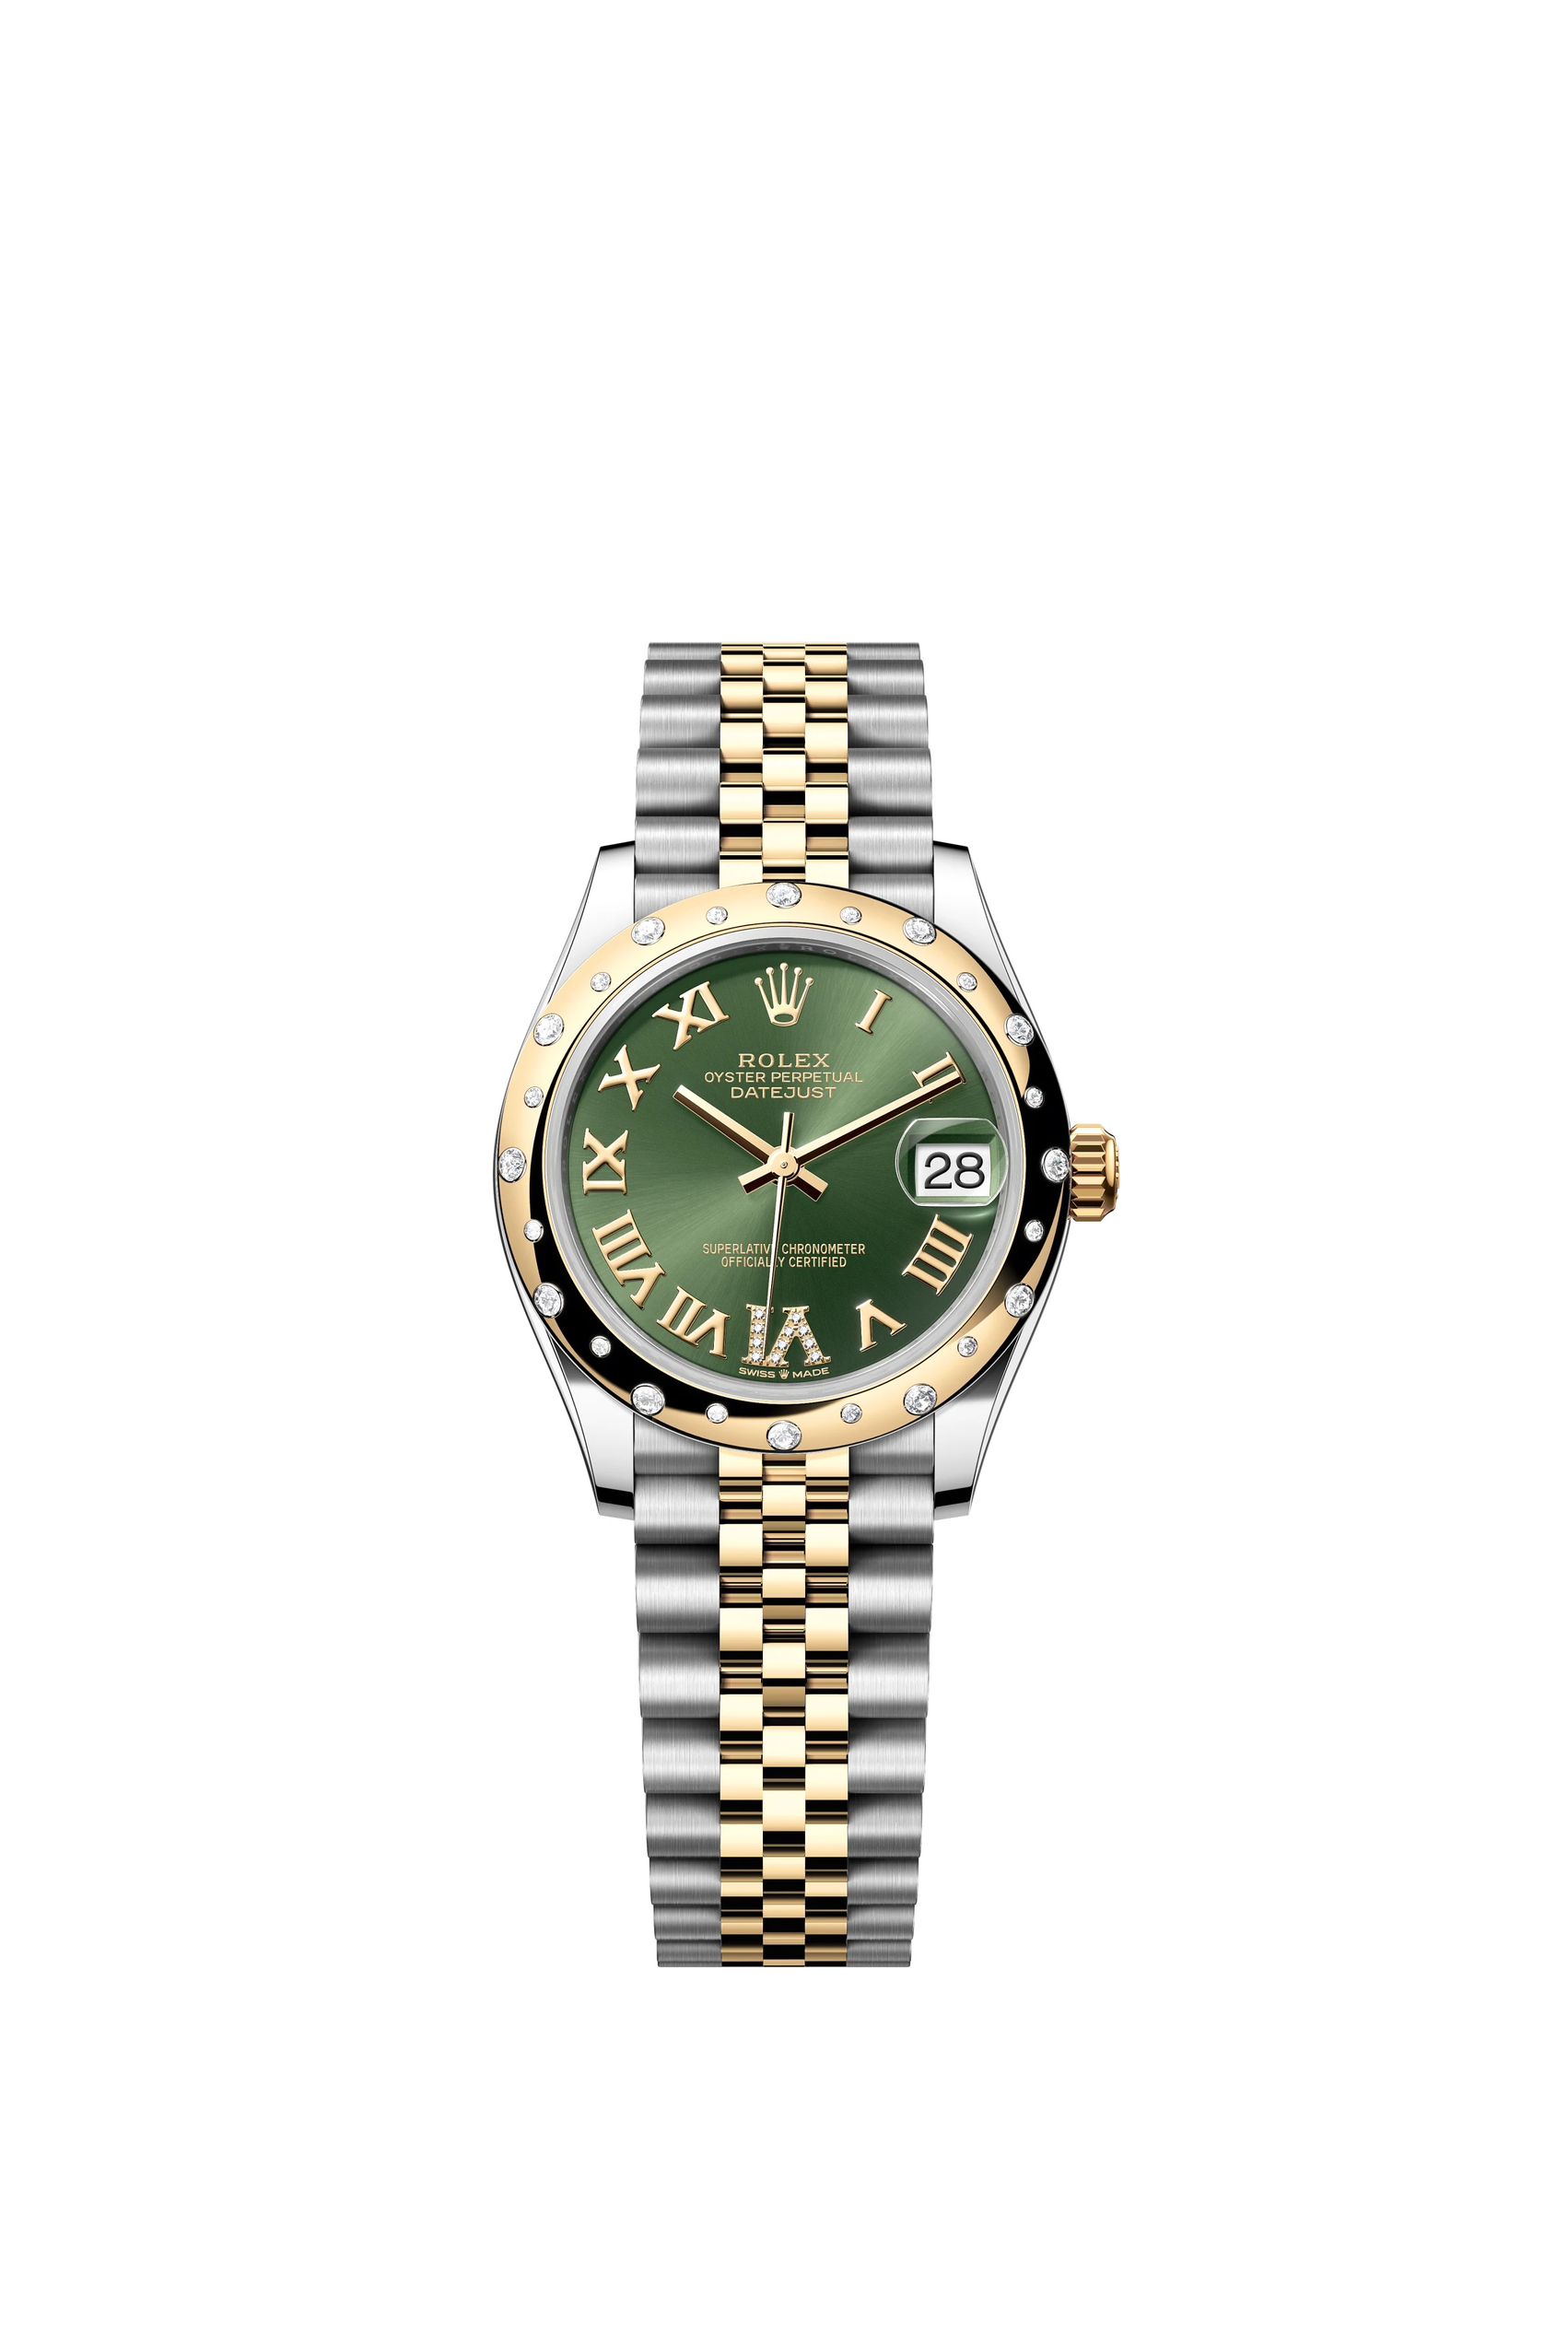 Rolex Datejust 31 Oyster, 31 mm, Oystersteel, yellow gold and diamonds Reference 278343RBR